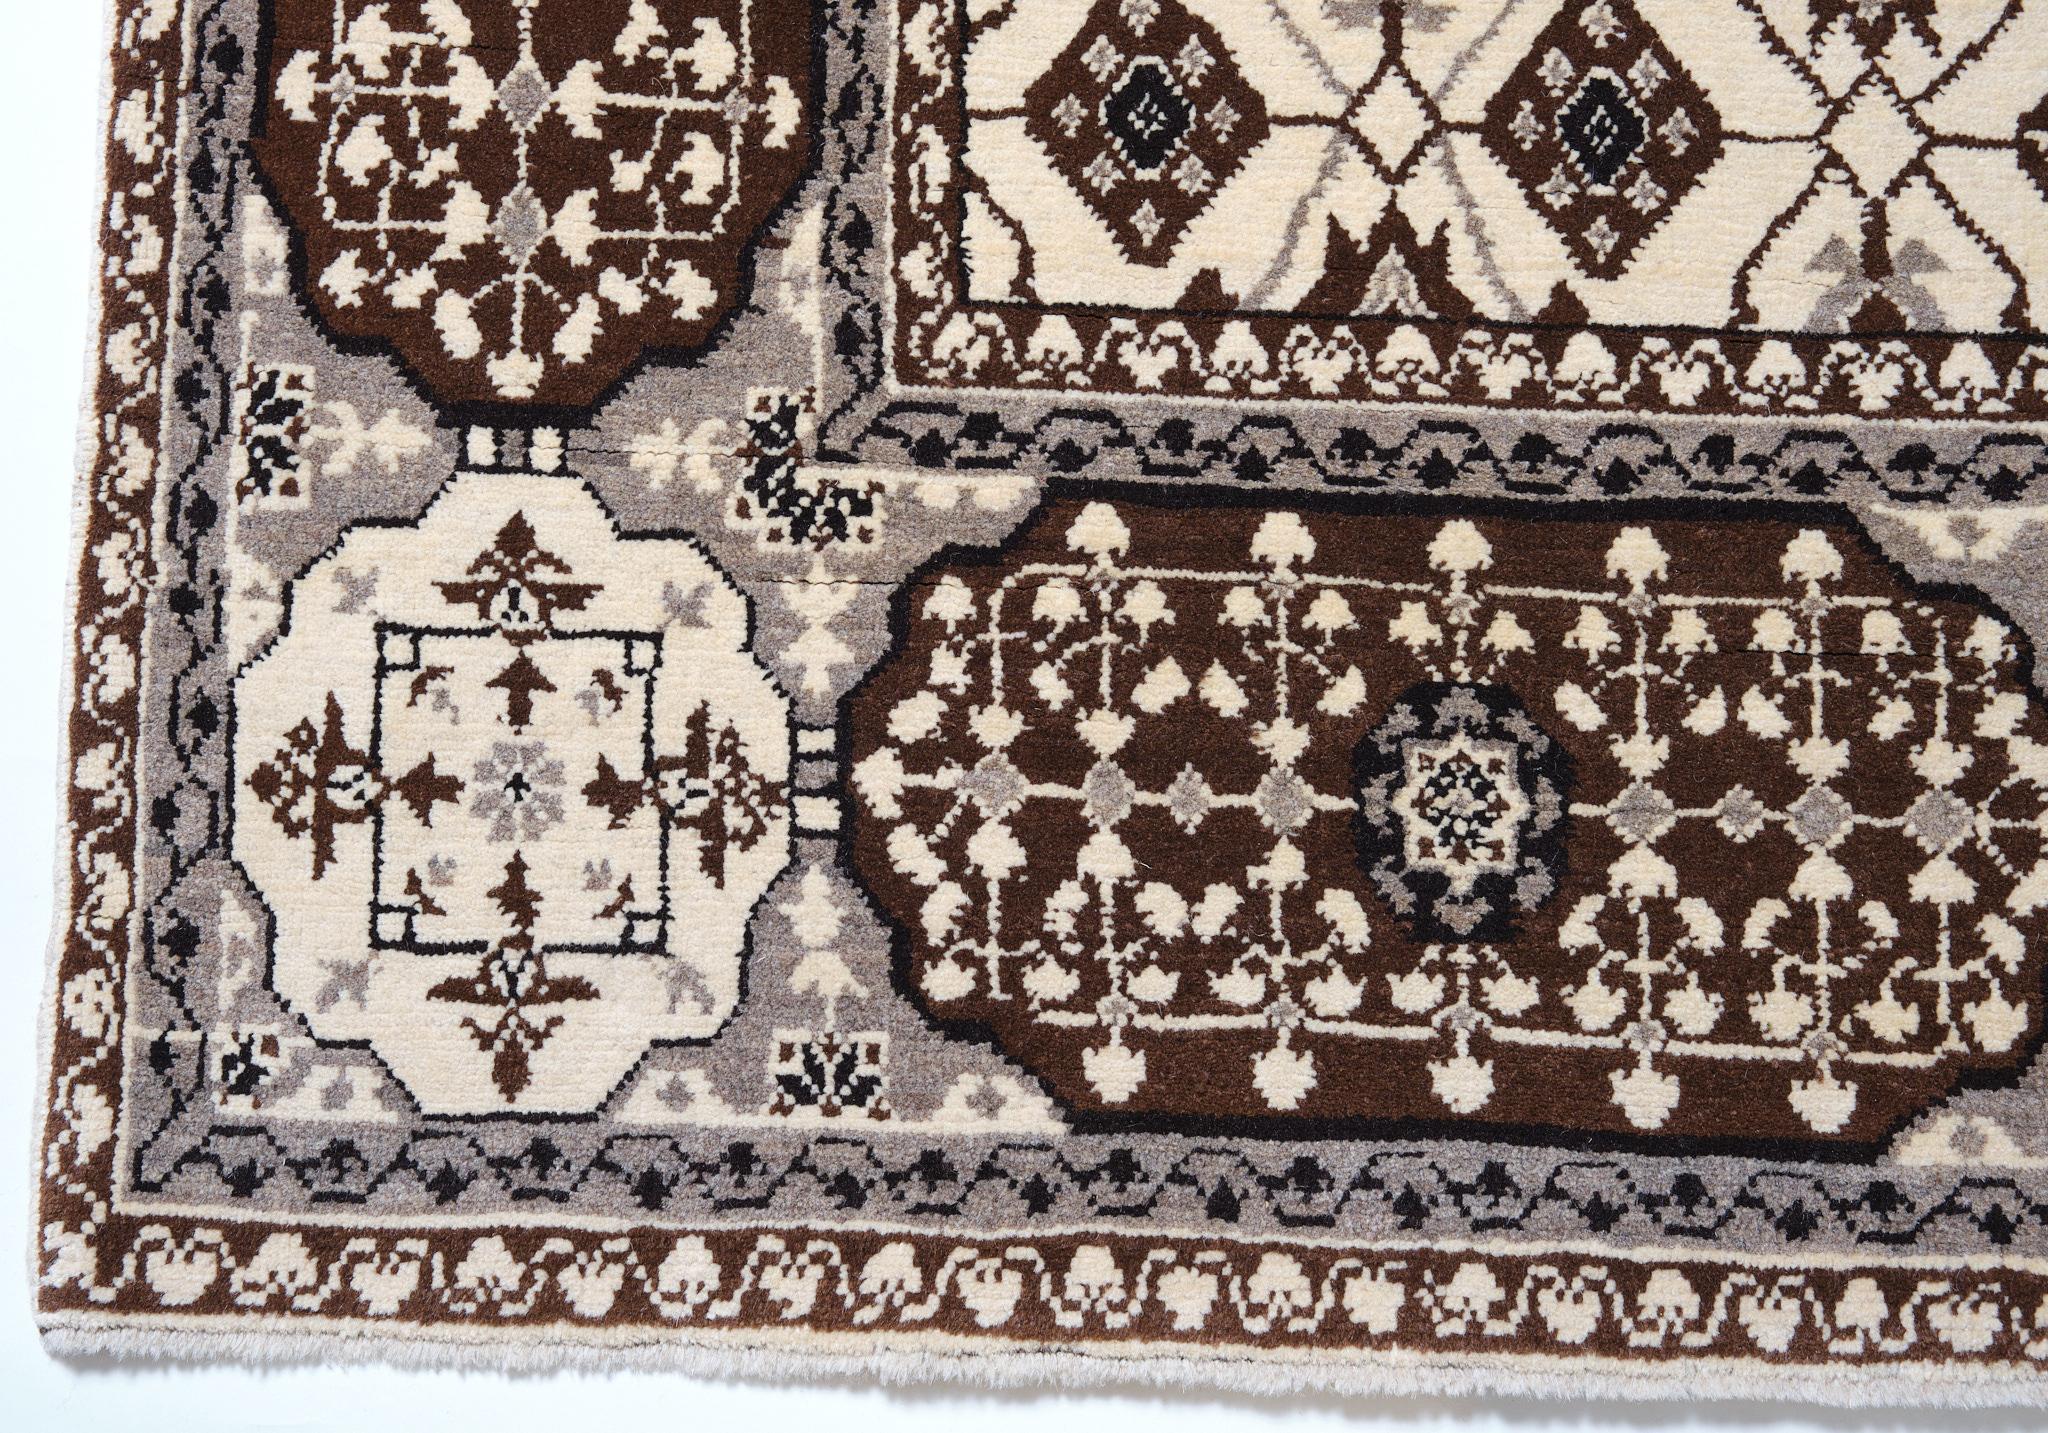 The source of carpet comes from the Mercer Collection Sotheby’s 2000 (catalog cover). This Mamluk-Cairene carpet is known, curiously featuring some type of lattice was designed in the early 16th-century rug by Mamluk Sultane of Cairo, Egypt. This